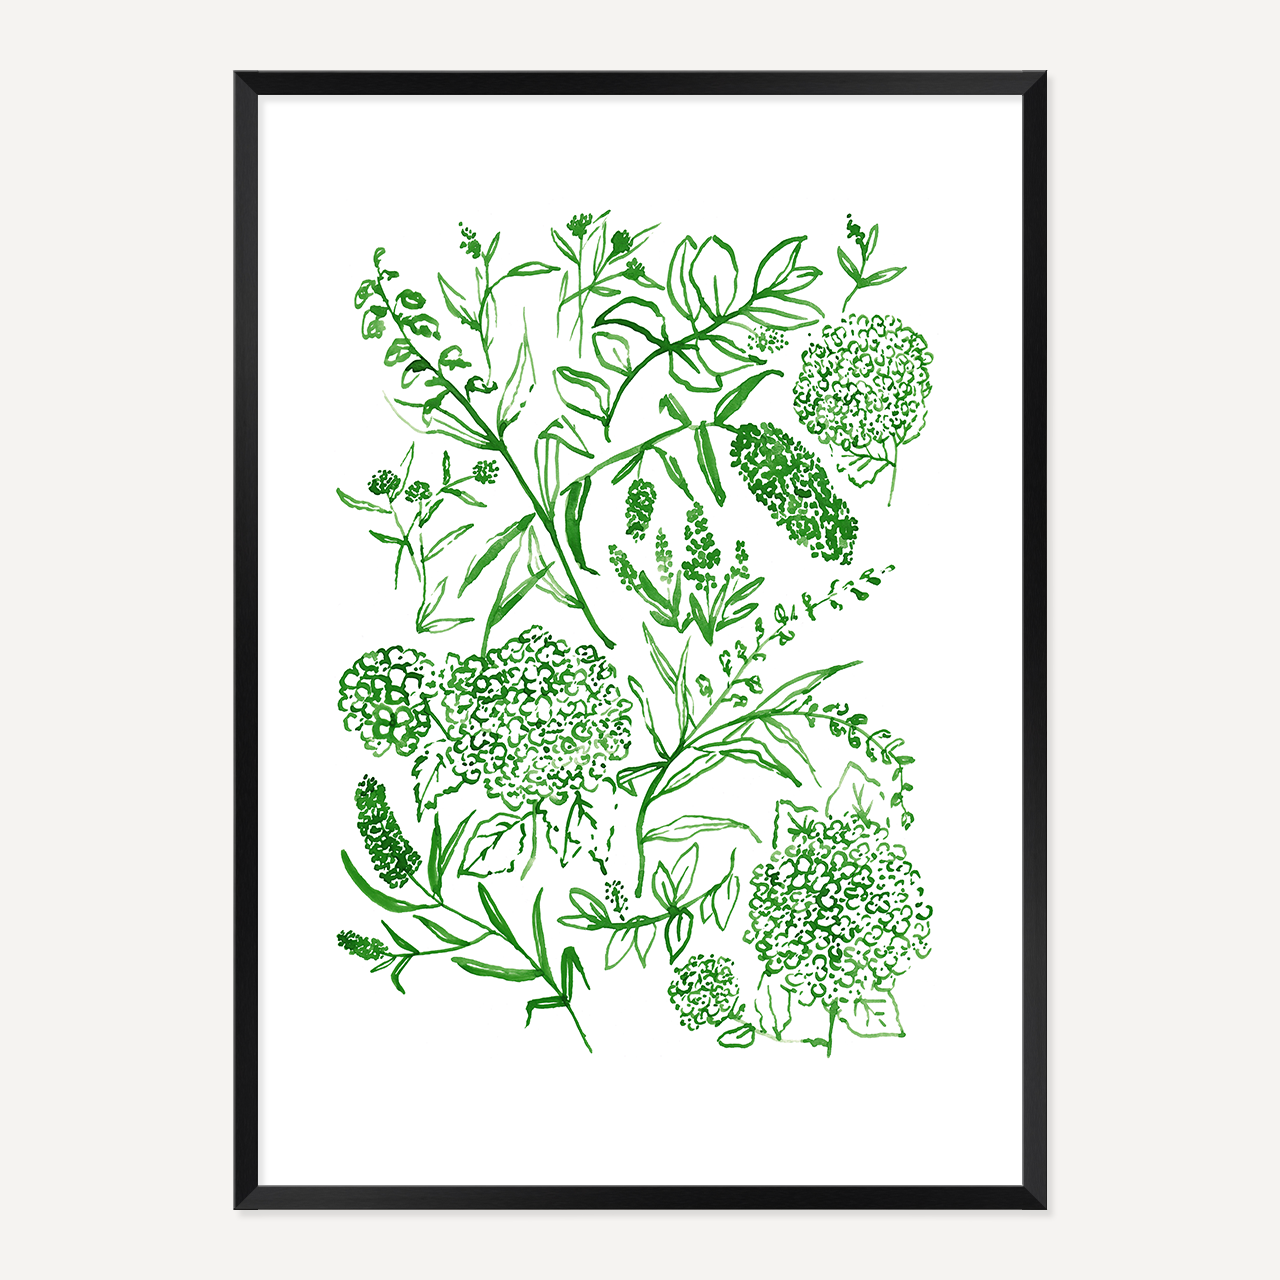 WATERCOLOUR FLORALS POSTER - GREEN